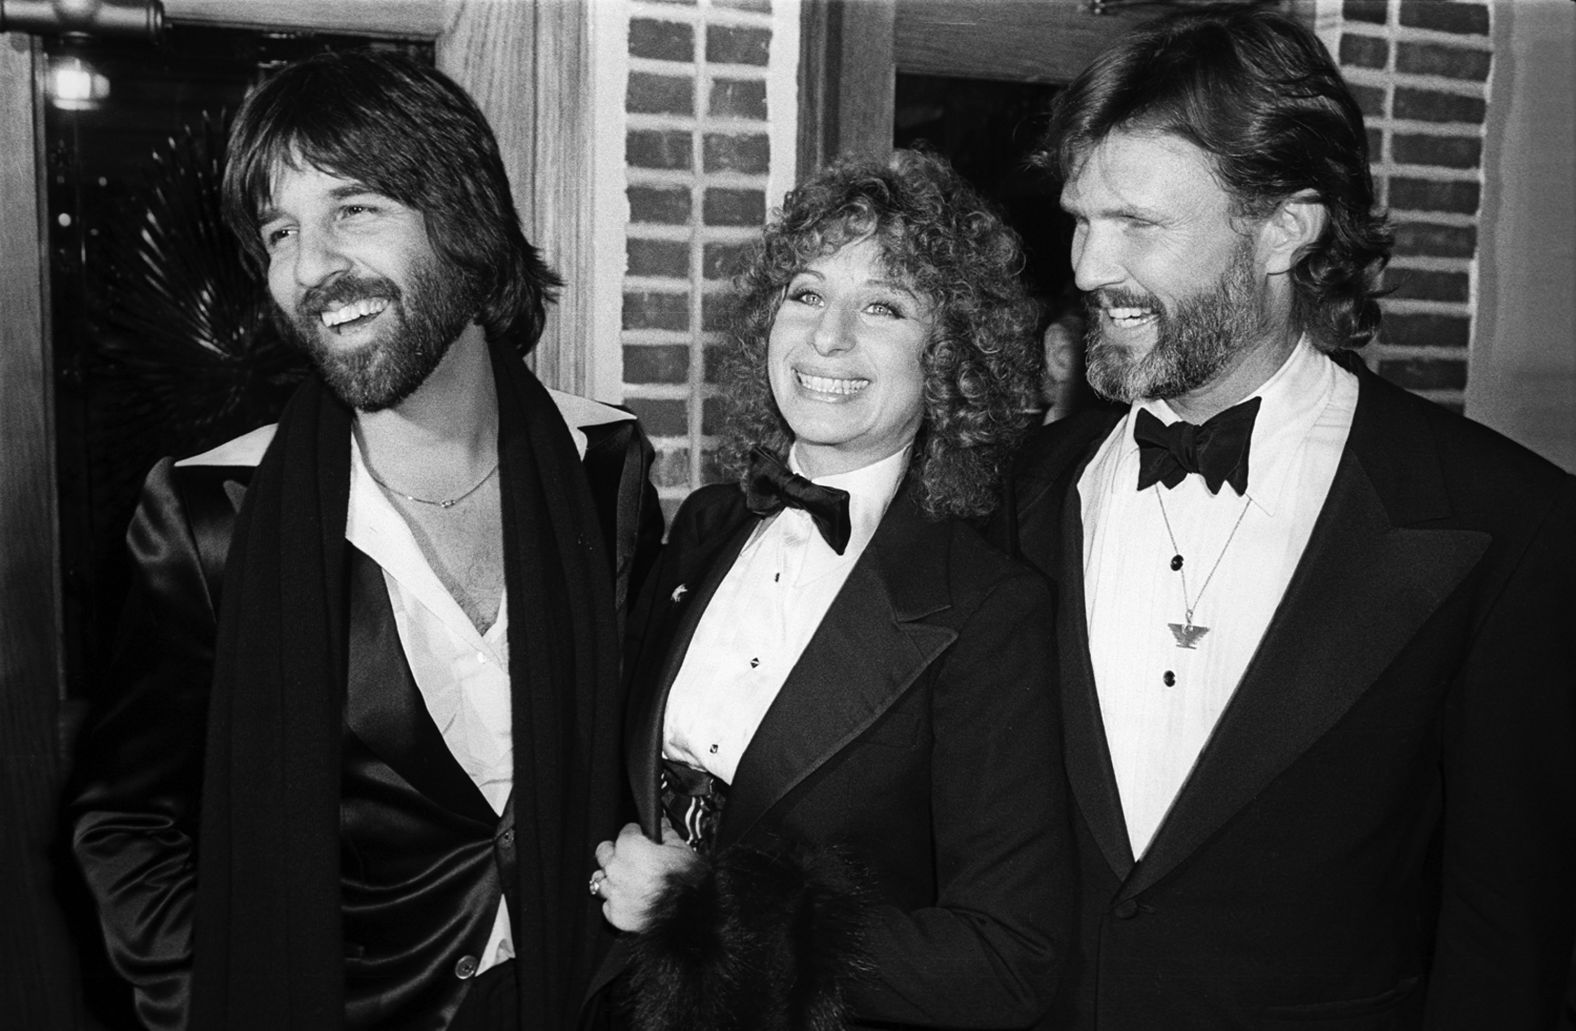 Streisand attends the premiere for "A Star is Born" with producer Jon Peters, left, and co-star Kris Kristofferson.